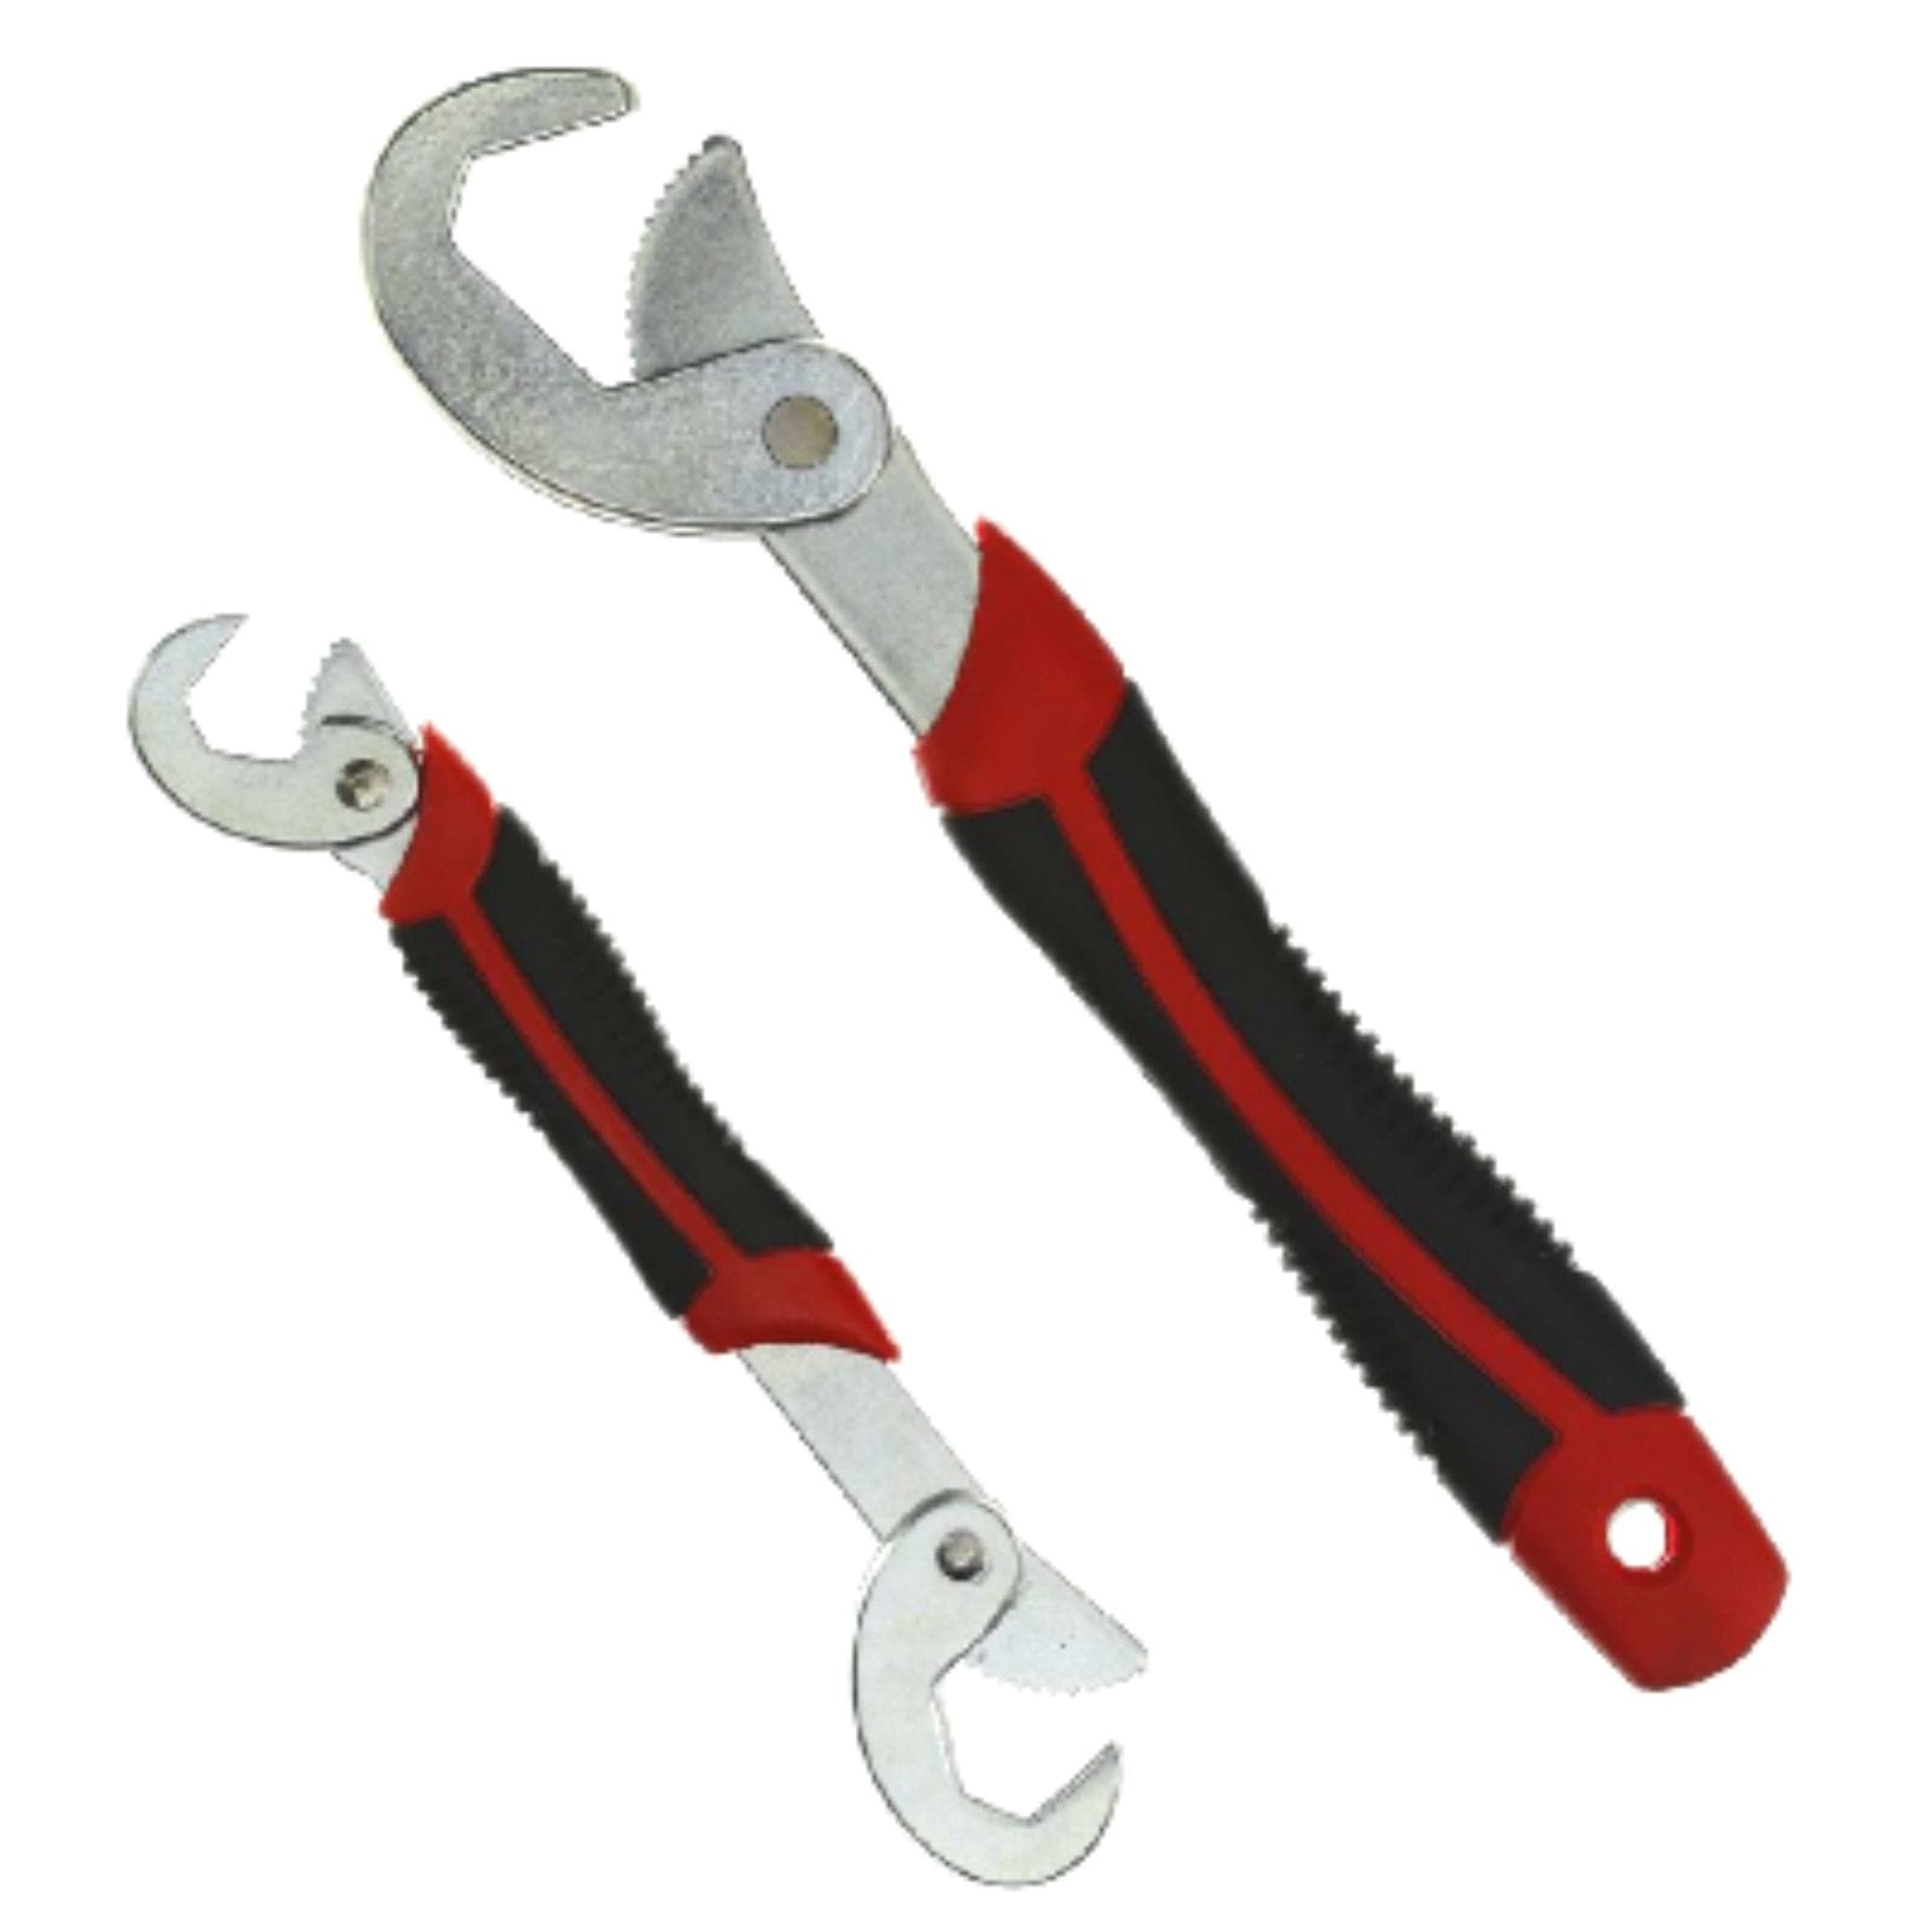 Universal ratchet wrench twin pack 9-32mm - South East Clearance Centre